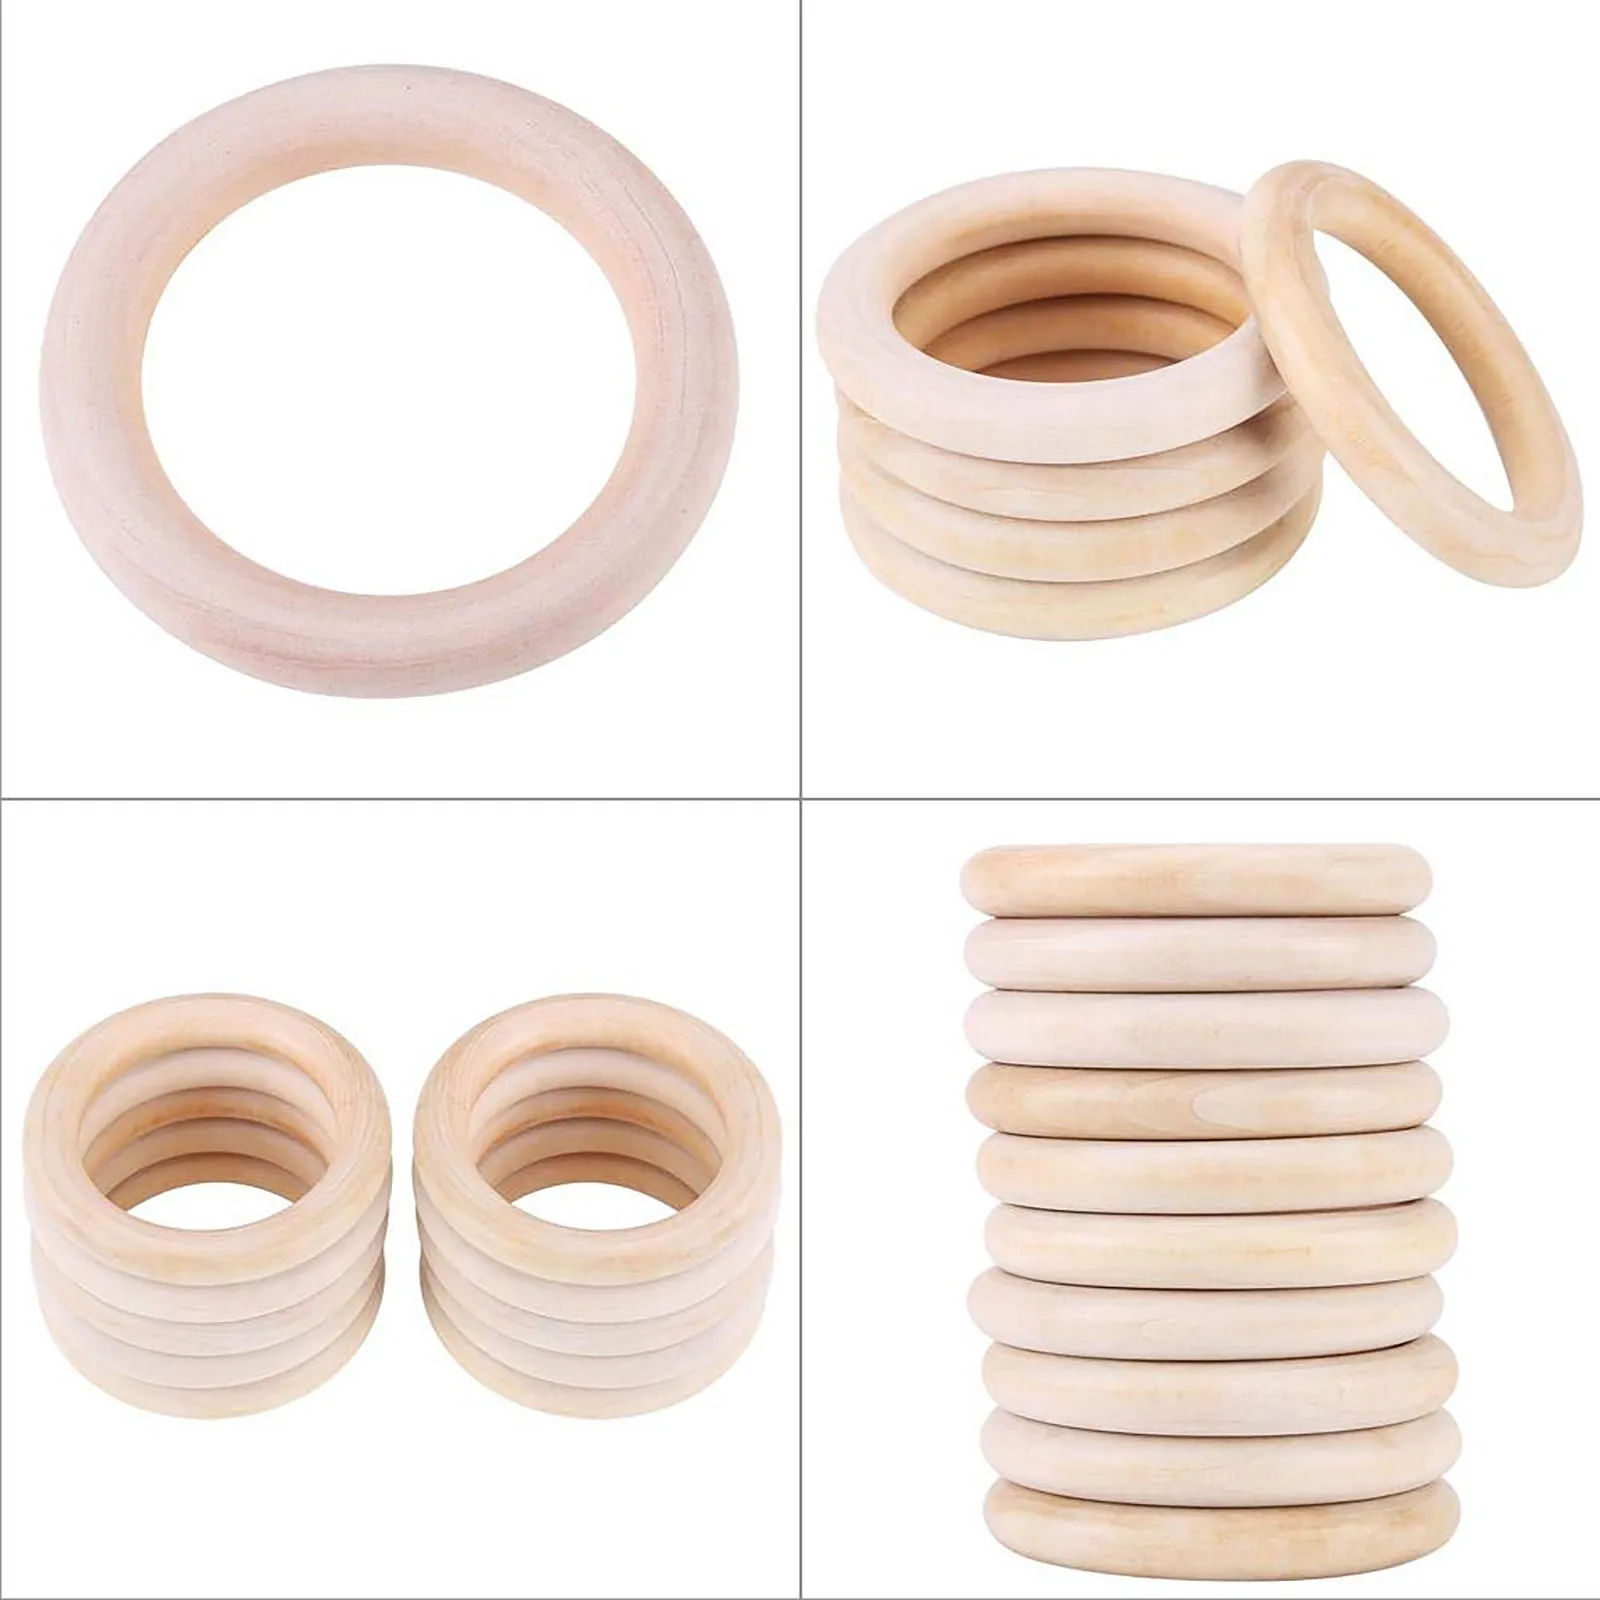 10 Pcs Macrame Wooden Rings 70 mm/2.7inch Unfinished Solid Large Wooden Rings for DIY Craft Pendant Connectors Jewelry Making